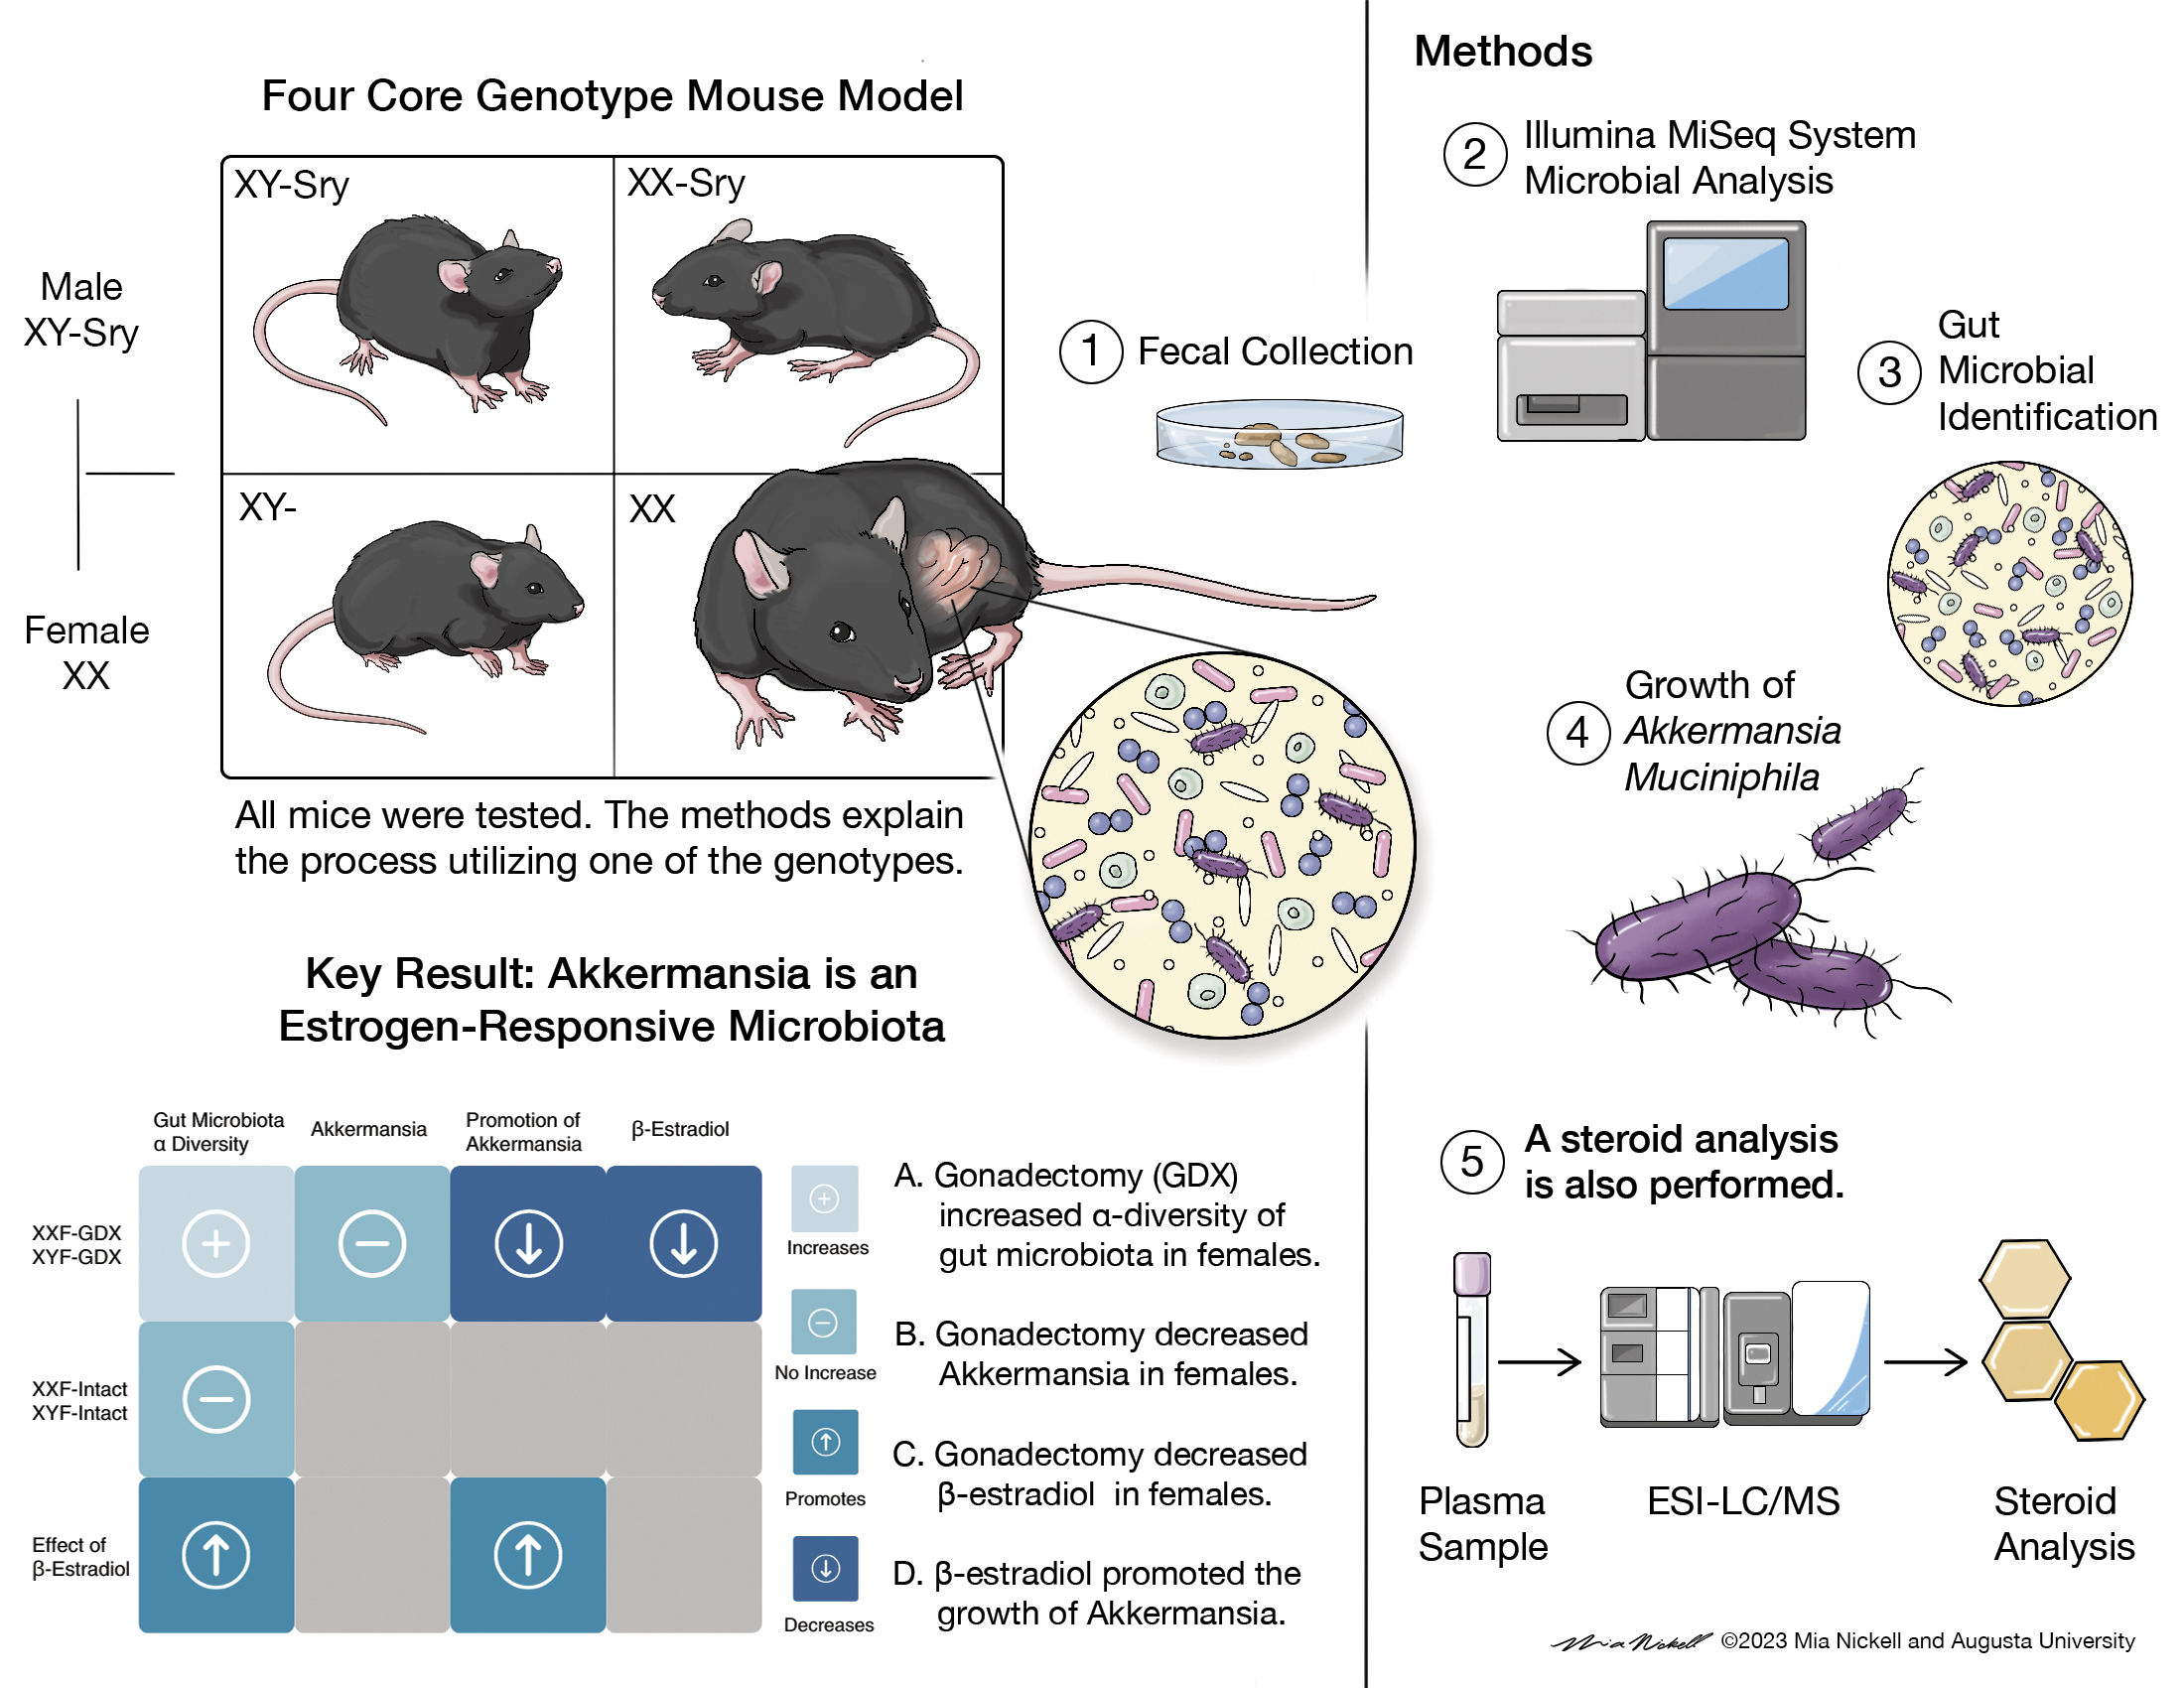 Title: Four core Genotype Mouse Model showing four mice. XY-SRY, XX-SRY, XY- and XX. All mice were tested. The methods explain the process utilizing one of the genotypes. 1. Fecal collection. 2. Illumina MiSeq Sytem Microbial Analysis. 3. Gut Microbial identification 4. Growth of Akkermansia Munciniphila 5. A steroid analysis is also performed. (plasma sample to ESI-LC/MS to Steroid analysis. Key result: Akkermansia is an Estrogen-responsive microbiota.